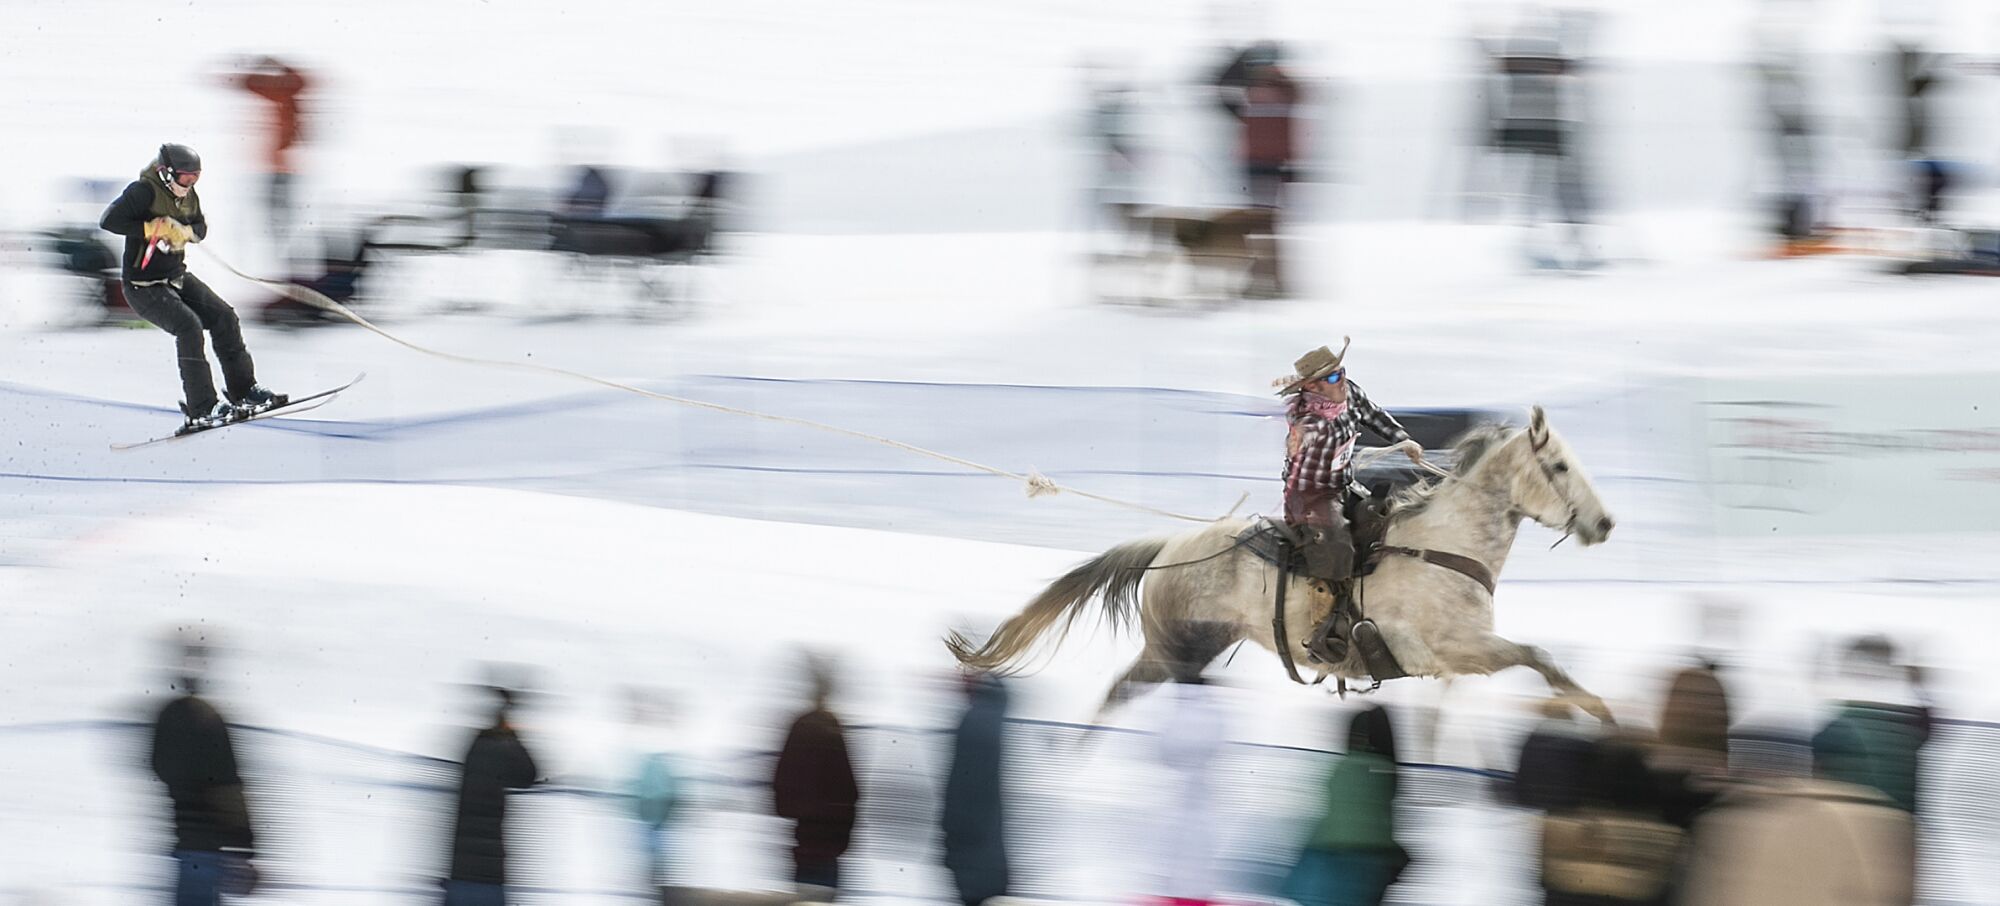 Team Cruisin' for a Bruisin' skier Jennie Hoover is pulled by Scott Hoover on Gordy at Skijoring Utah at Soldier Hollow Nordic Center.